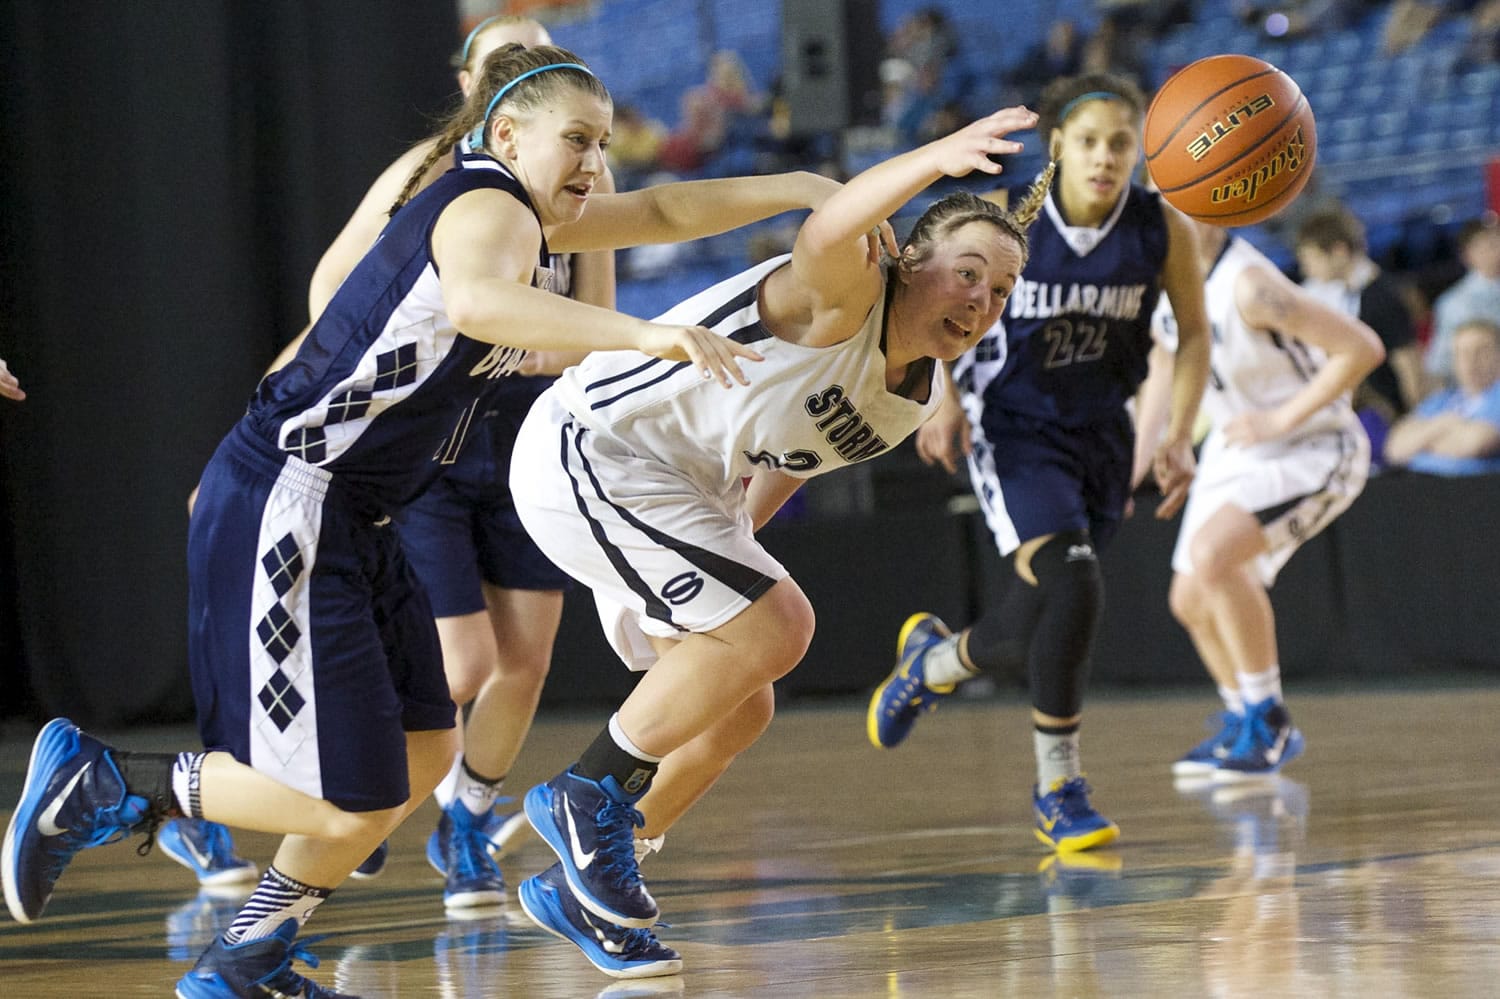 Hannahjoy Adams fights for a lose ball as Skyview looses to Bellarmine Prep 51-35 at the 2015 WIAA Hardwood Classic Girls 4A tournament at the Tacoma Dome, Friday, March 6, 2015.